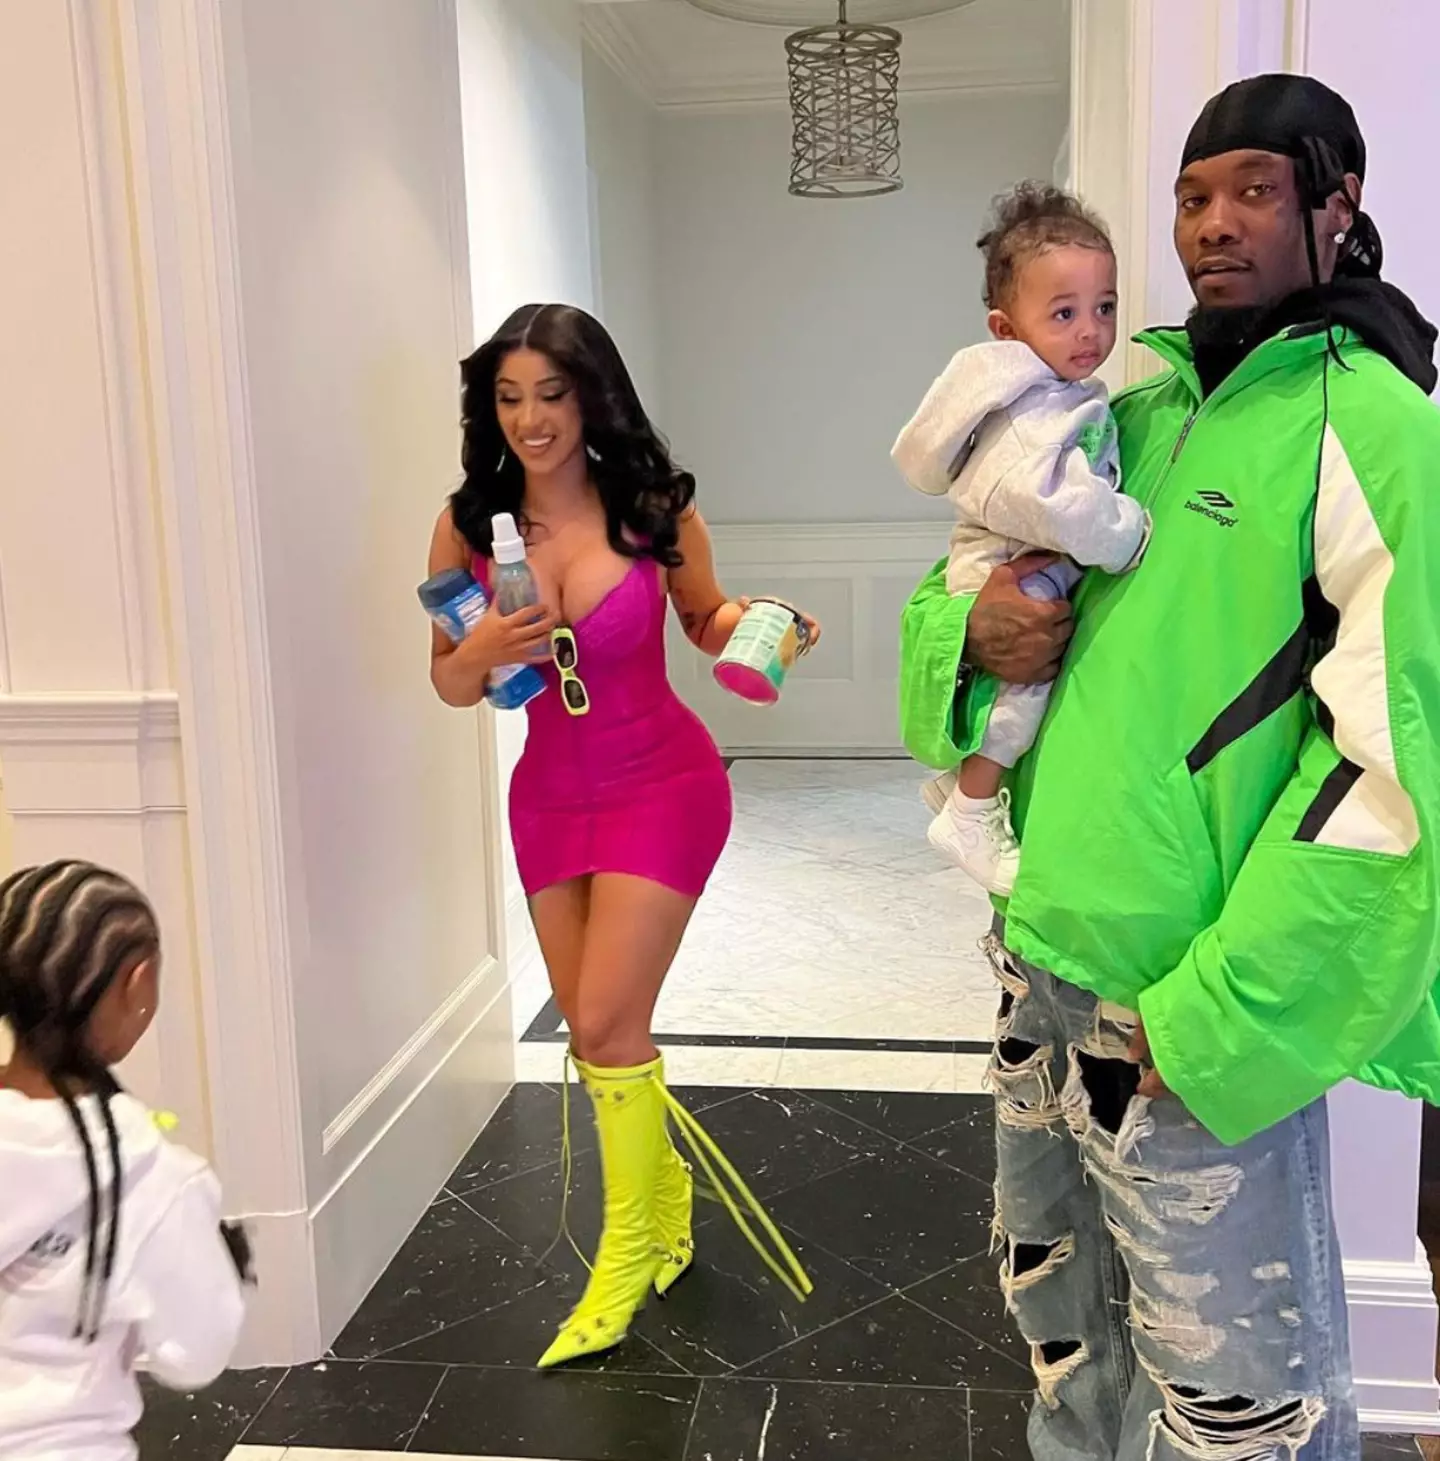 The controversial rapper is a mother of two young children.